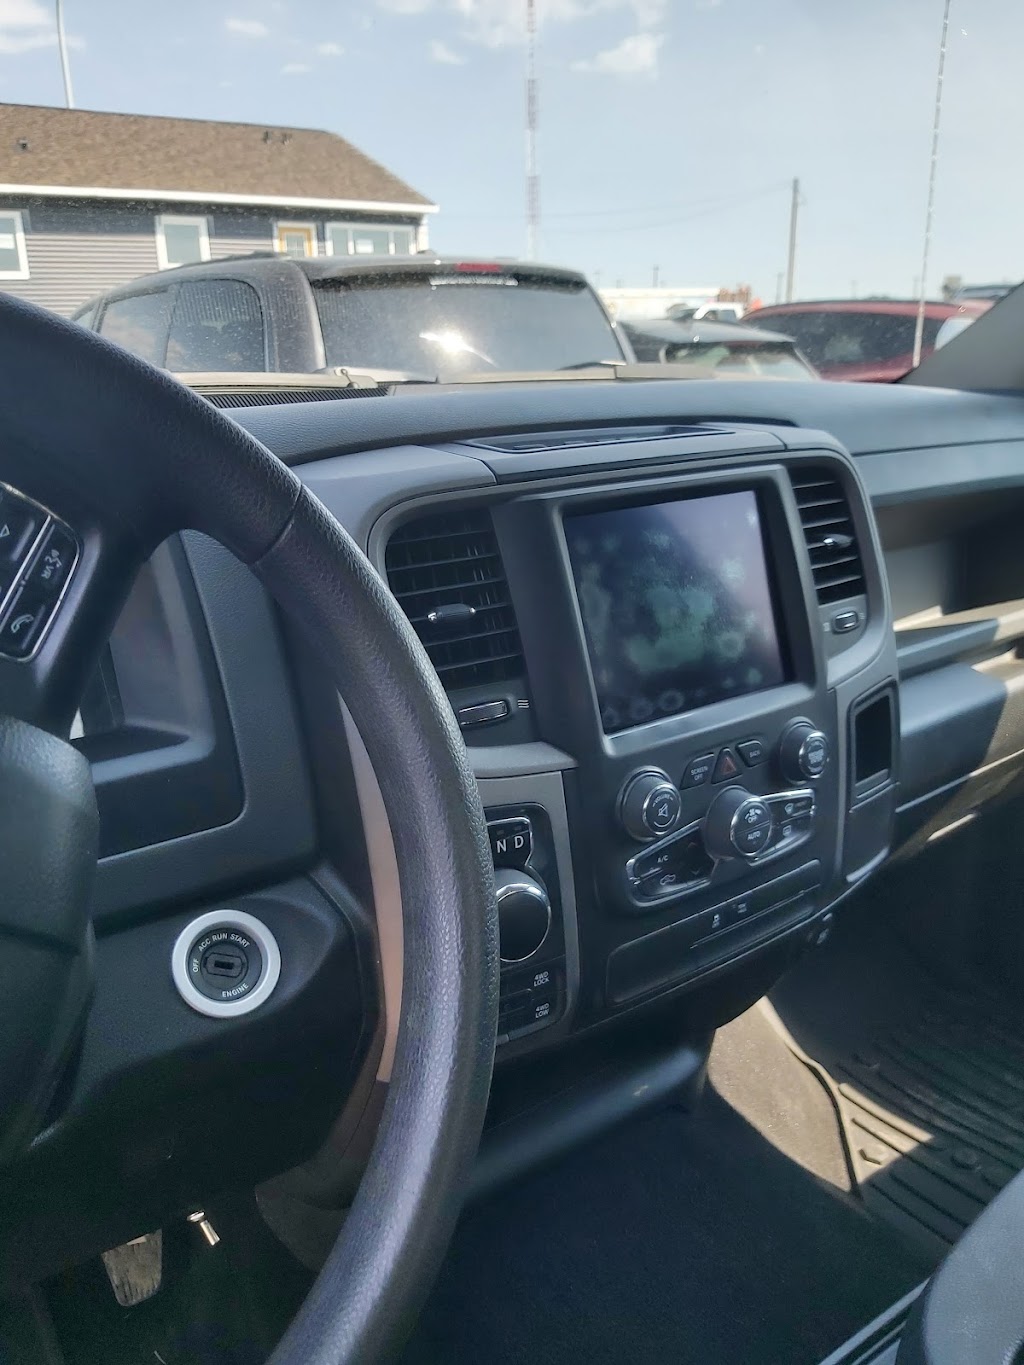 LEGACY TABER CHRYSLER DODGE JEEP RAM | 5206 46 Ave, Taber, AB T1G 2A7, Canada | Phone: (866) 787-0538